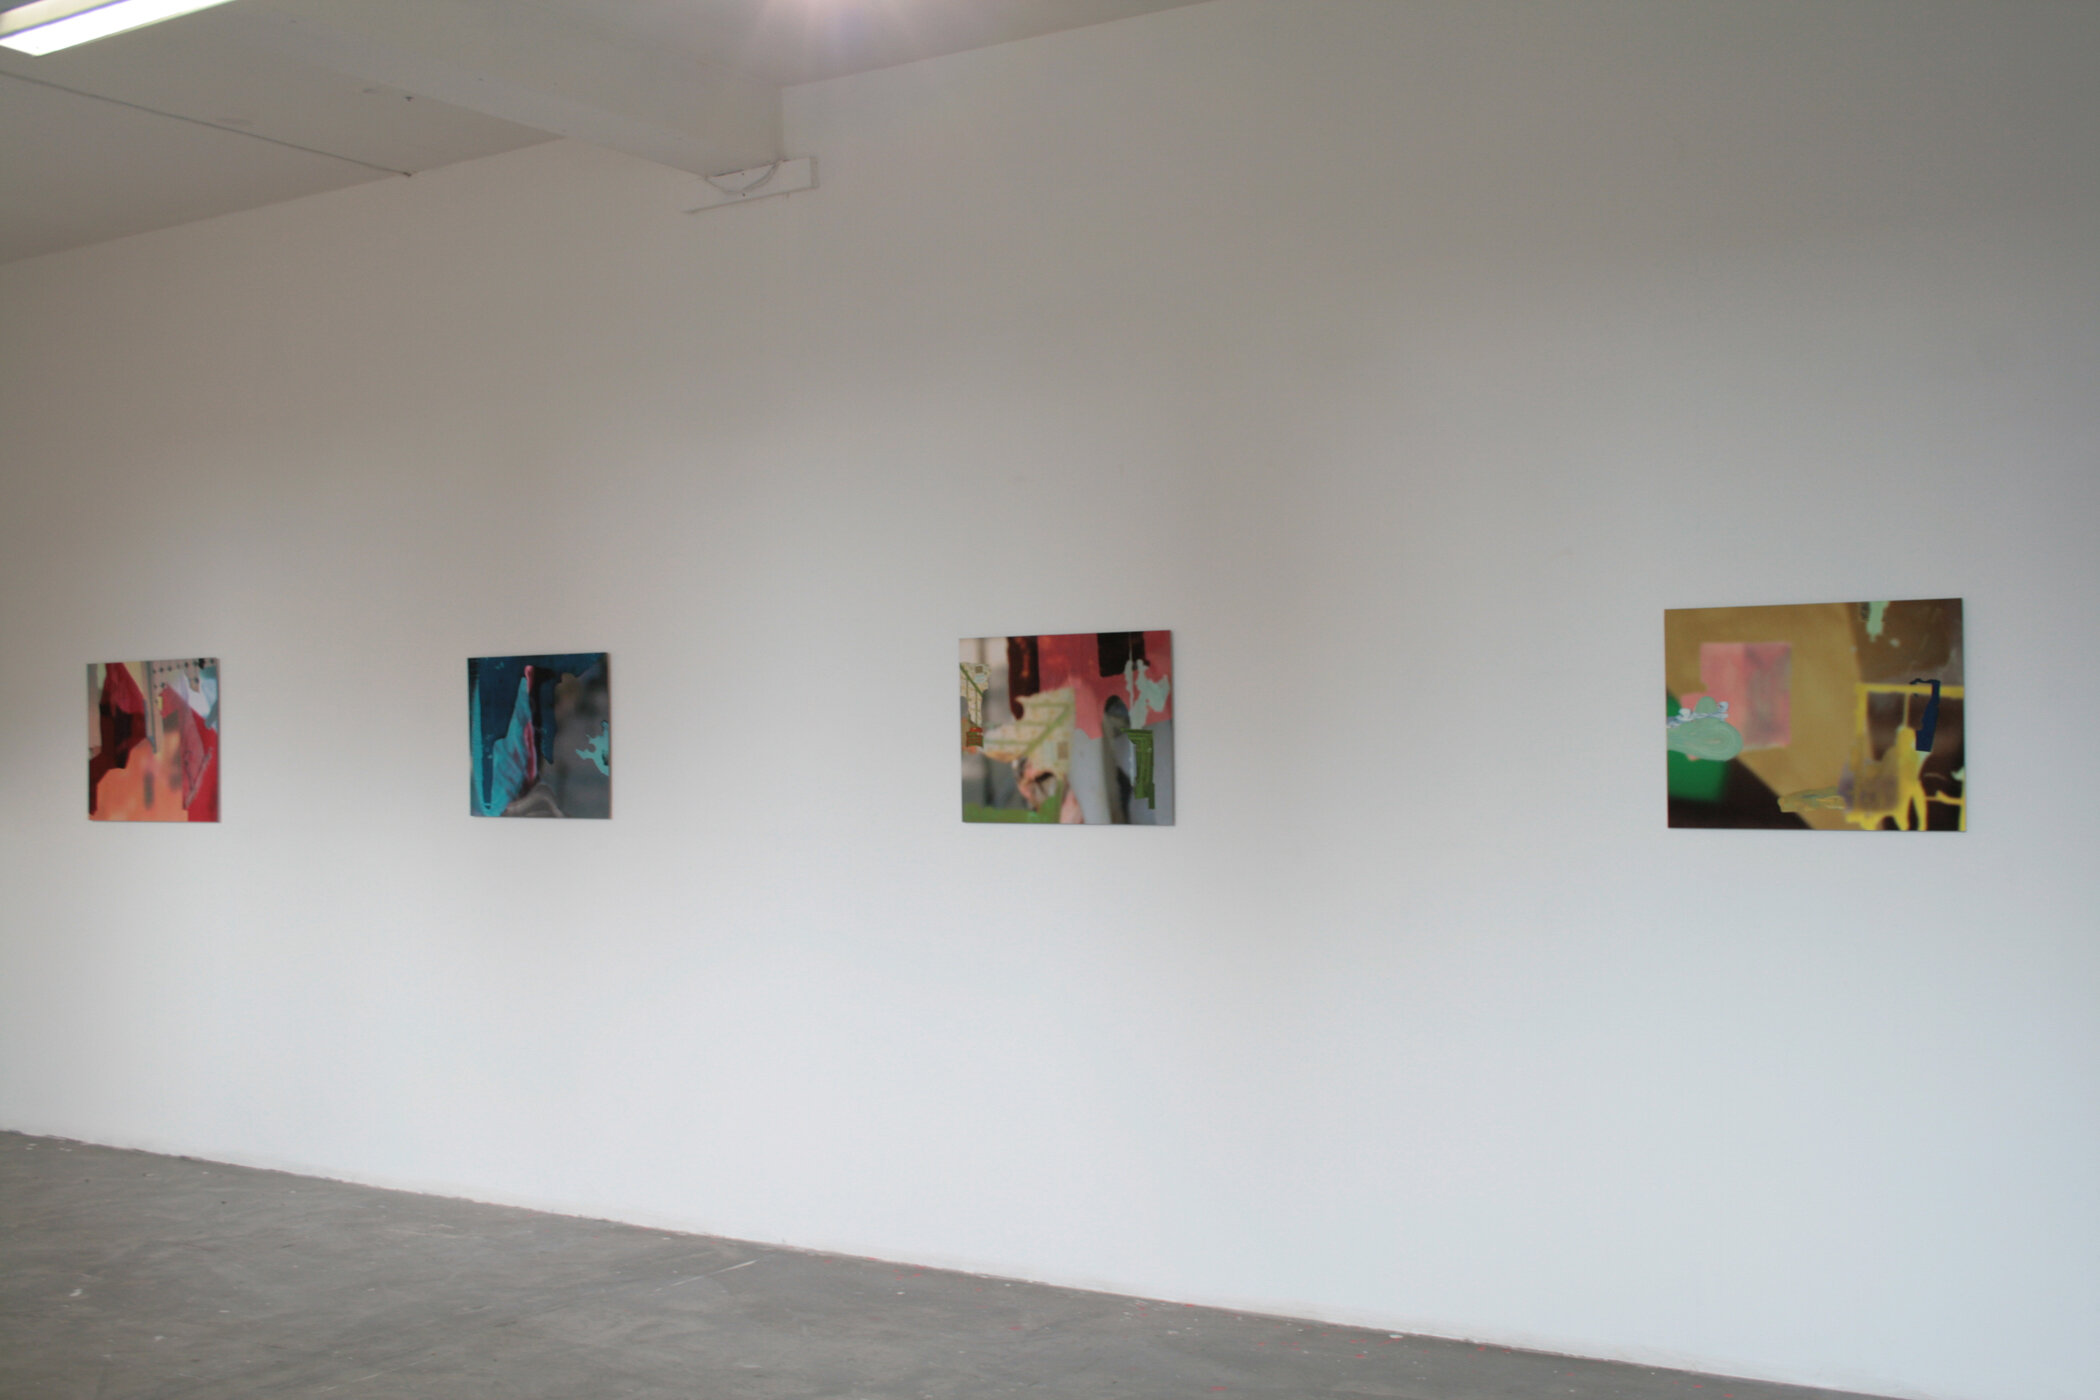   (re)viewing,  installation image, Project Space, Golden Thread Gallery, 2012 